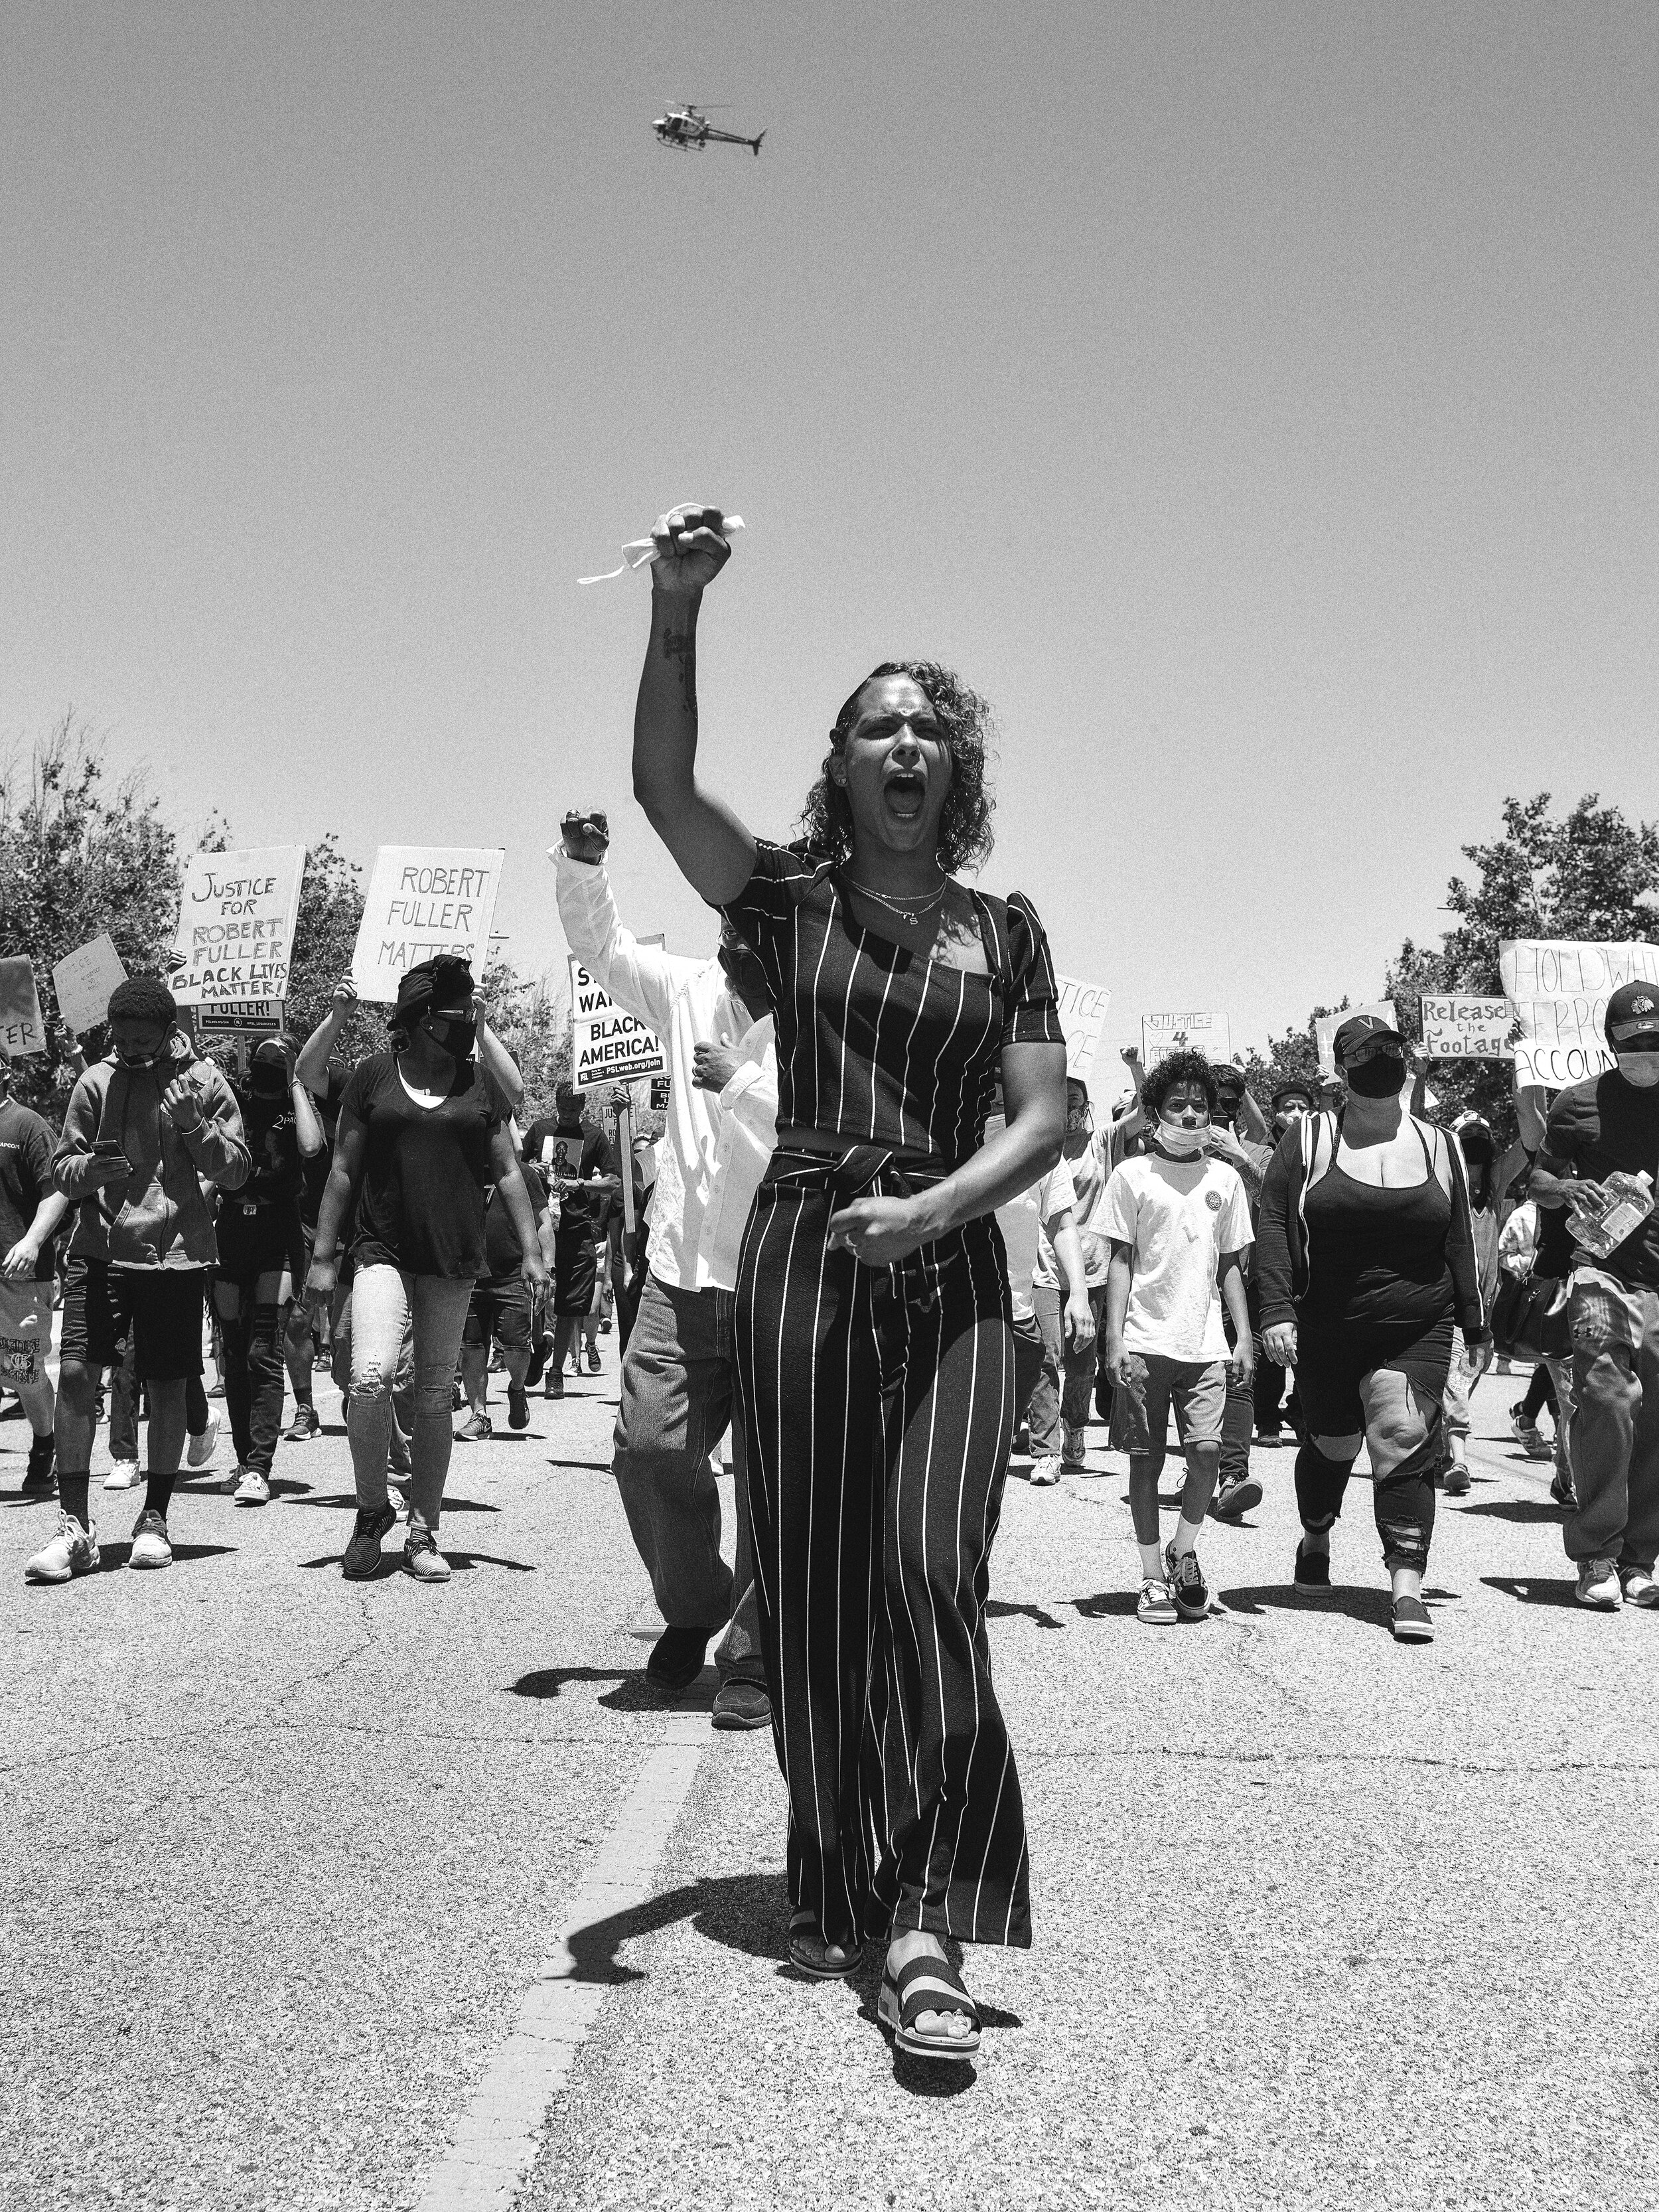 Isabel Flax leading protestors in Palmdale, California